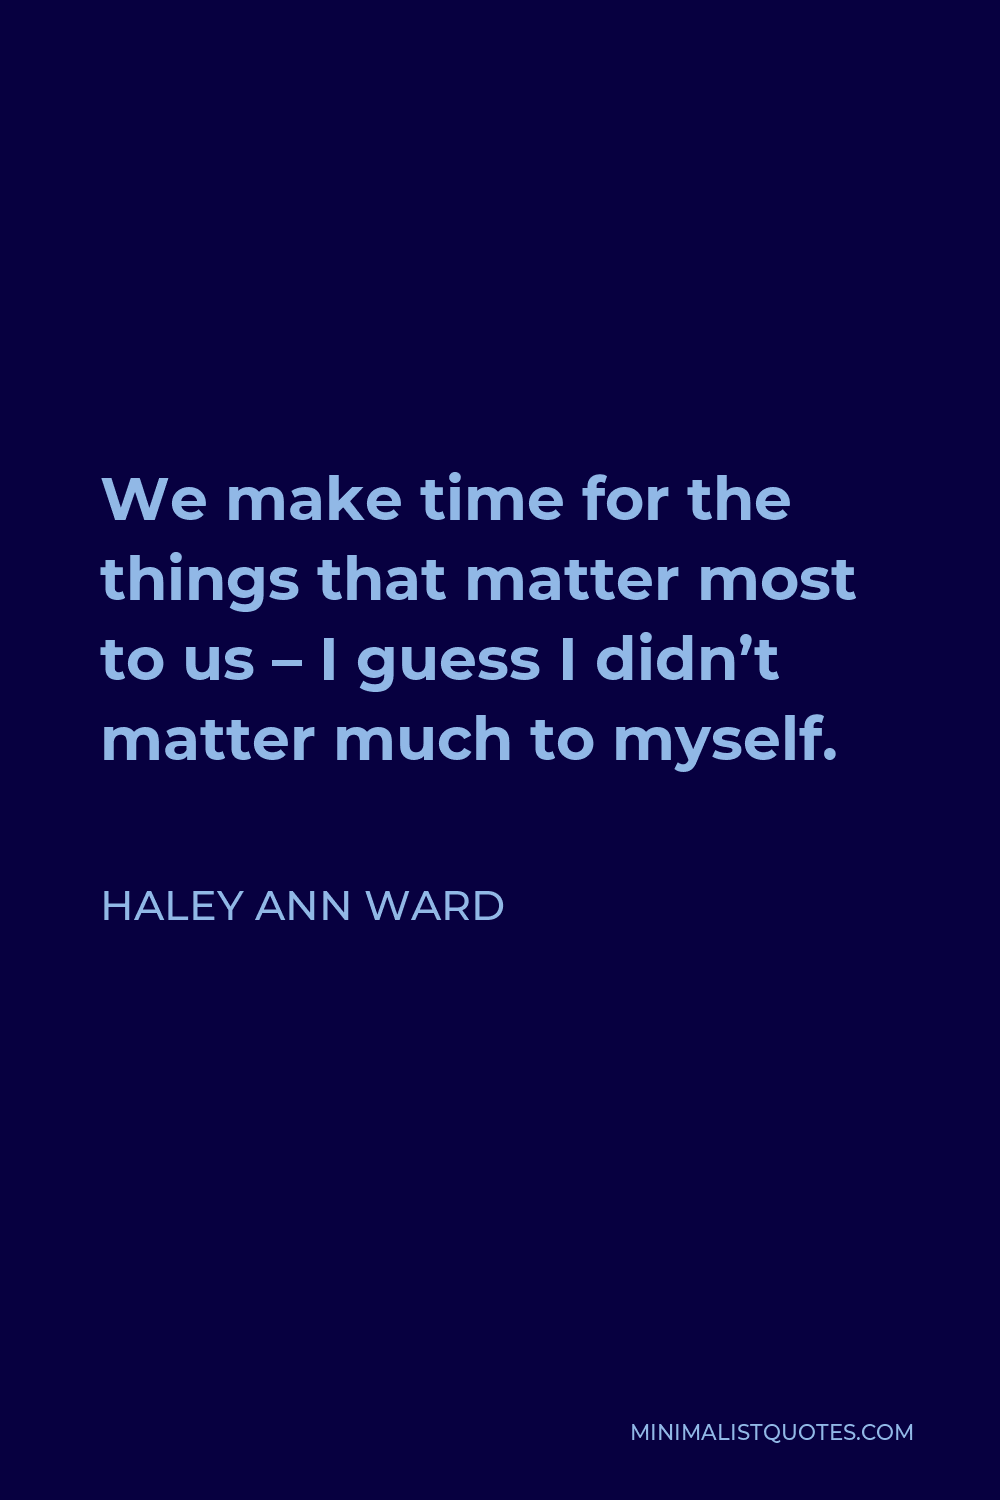 Haley Ann Ward Quote - We make time for the things that matter most to us – I guess I didn’t matter much to myself.